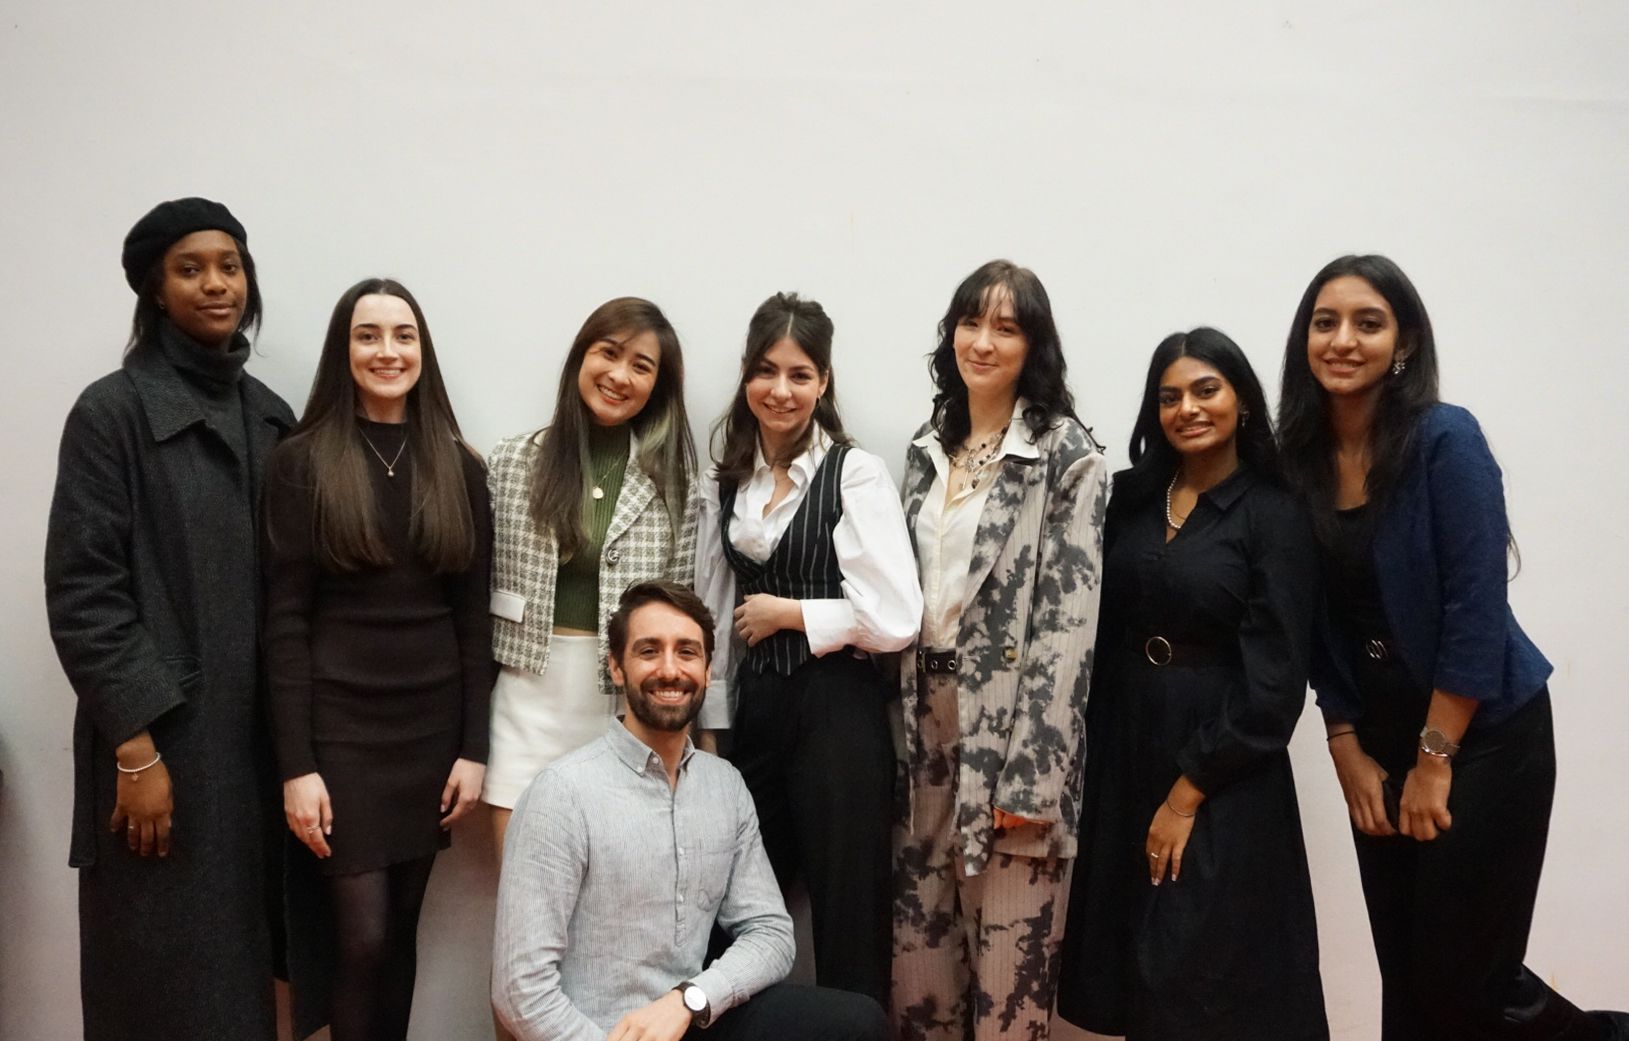 From left to right; Rayanne Golding, Georgia Wells, Yuanbei Lim, Joyce Lemmer, Jana Frohlich, Shivani Mistry and Shivani Bhamidipati with Course Leader Diogo Baltazar